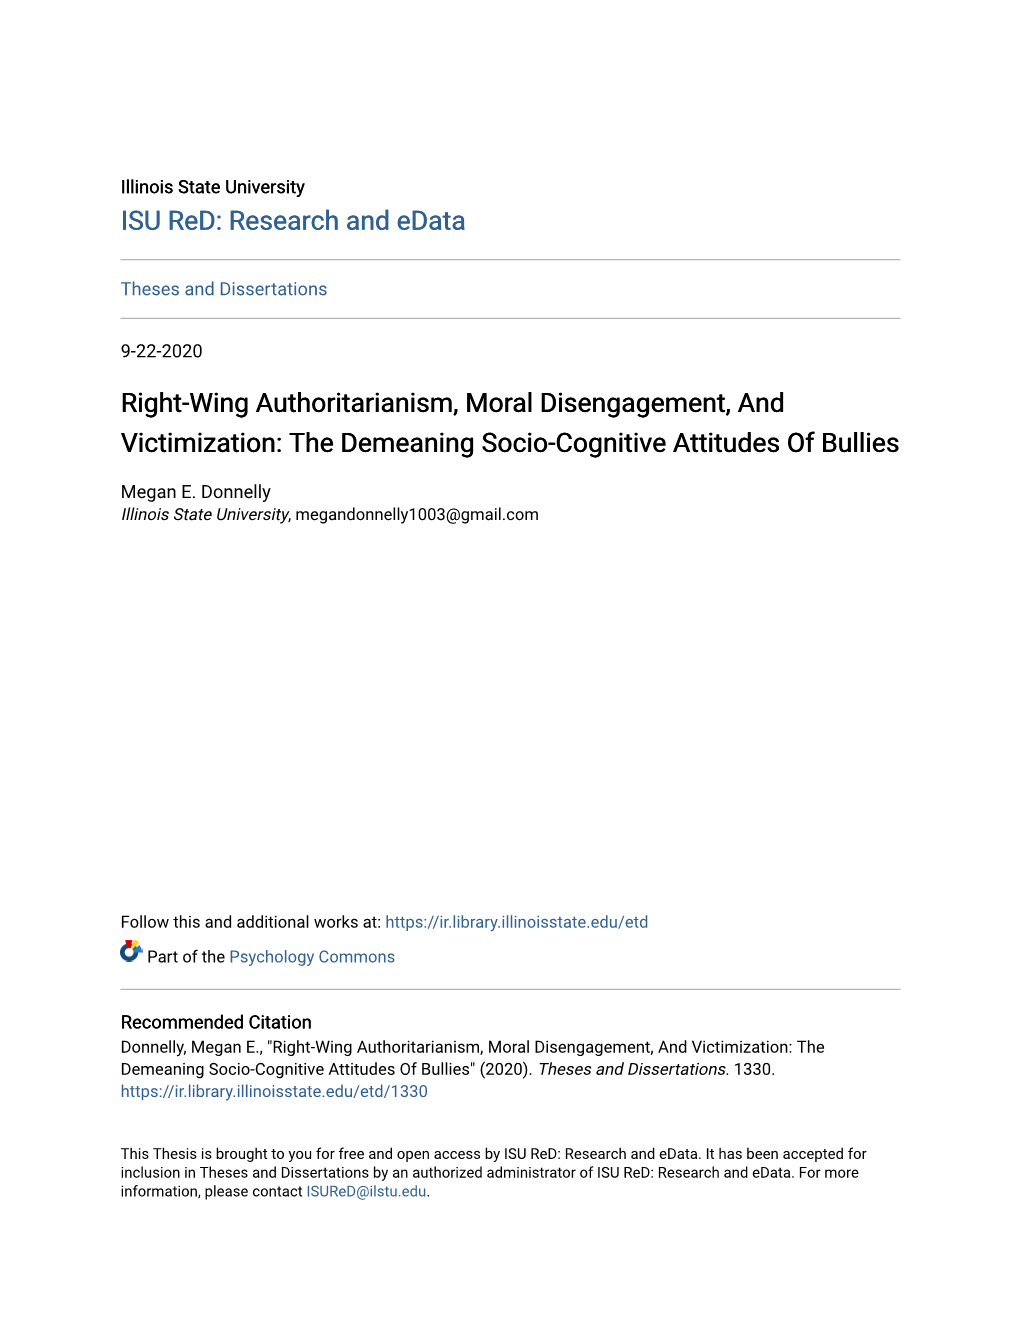 Right-Wing Authoritarianism, Moral Disengagement, and Victimization: the Demeaning Socio-Cognitive Attitudes of Bullies